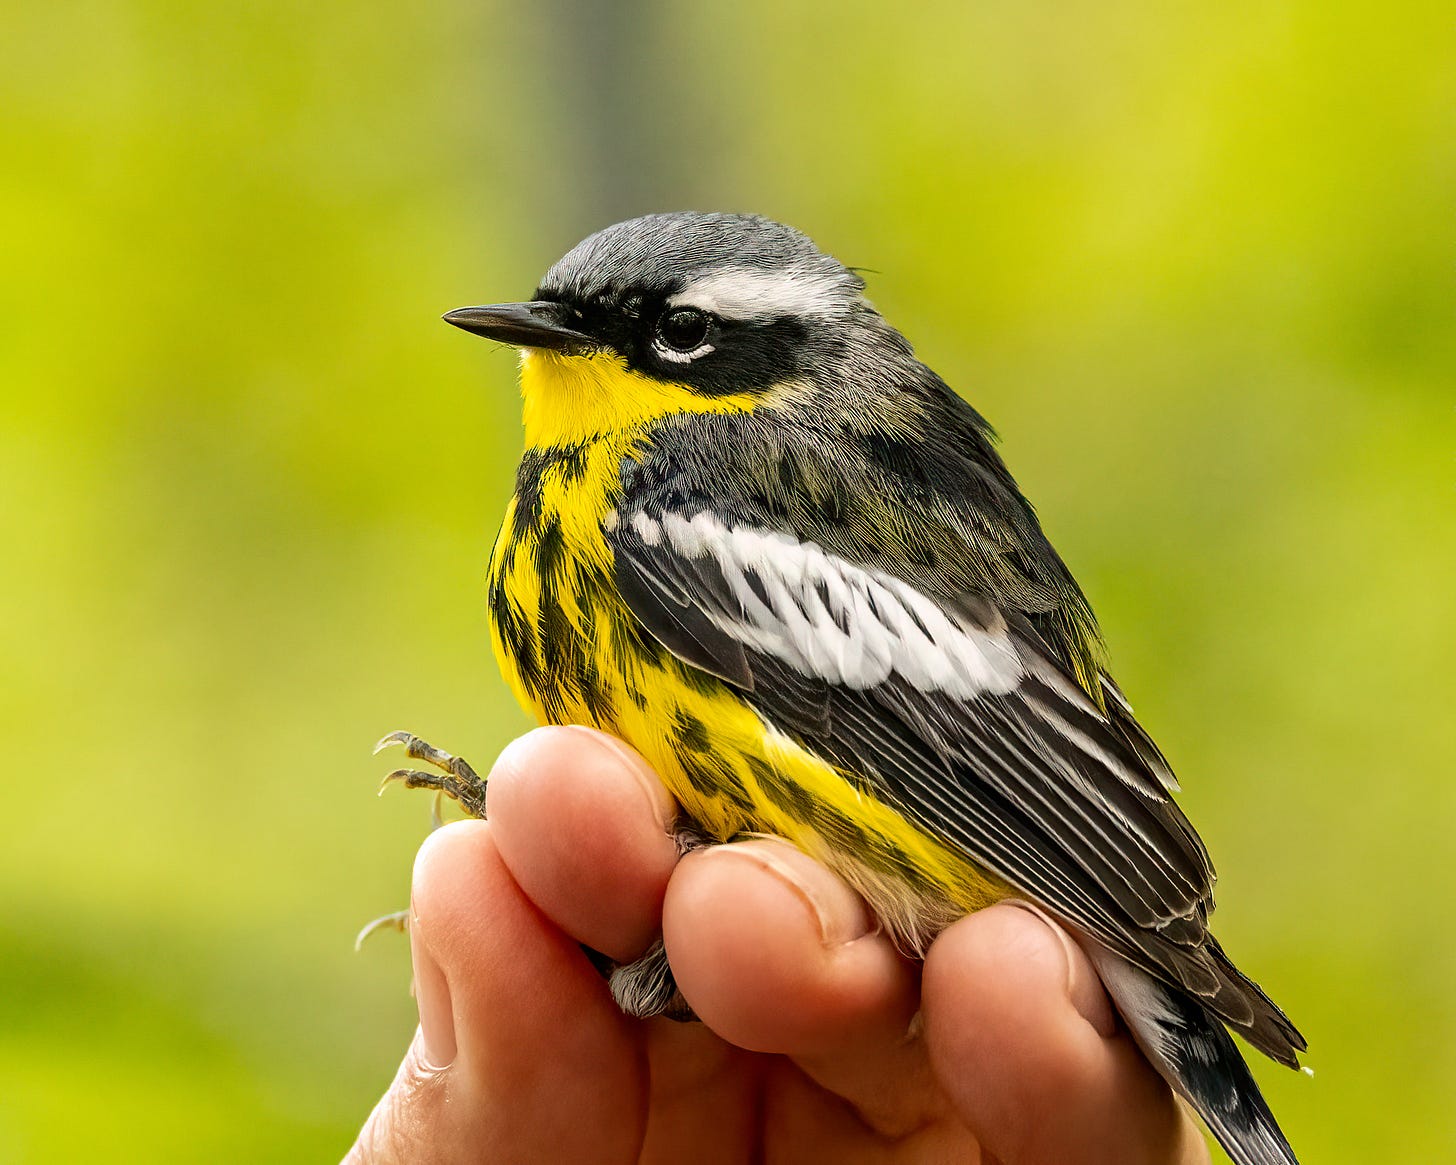 This image shows a human hand holding a magnolia warbler, which has a bright yellow breast with black streaks. The magnolia has a black stripe through its eye and a white stripe above its eye. It's lower eyelid is bright white.